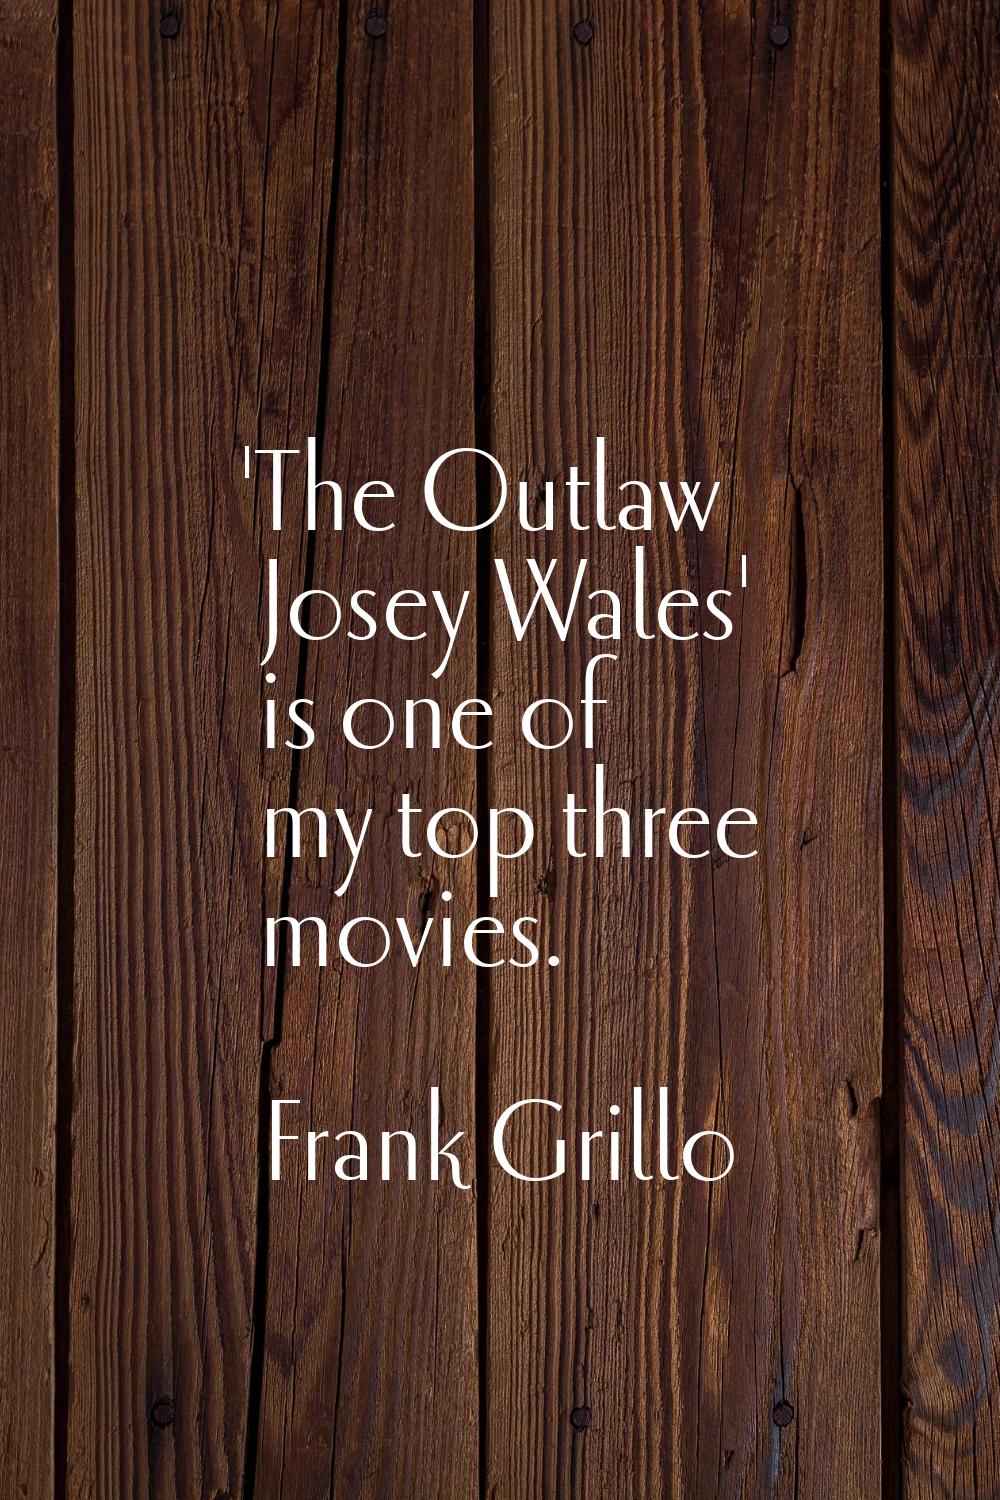 'The Outlaw Josey Wales' is one of my top three movies.